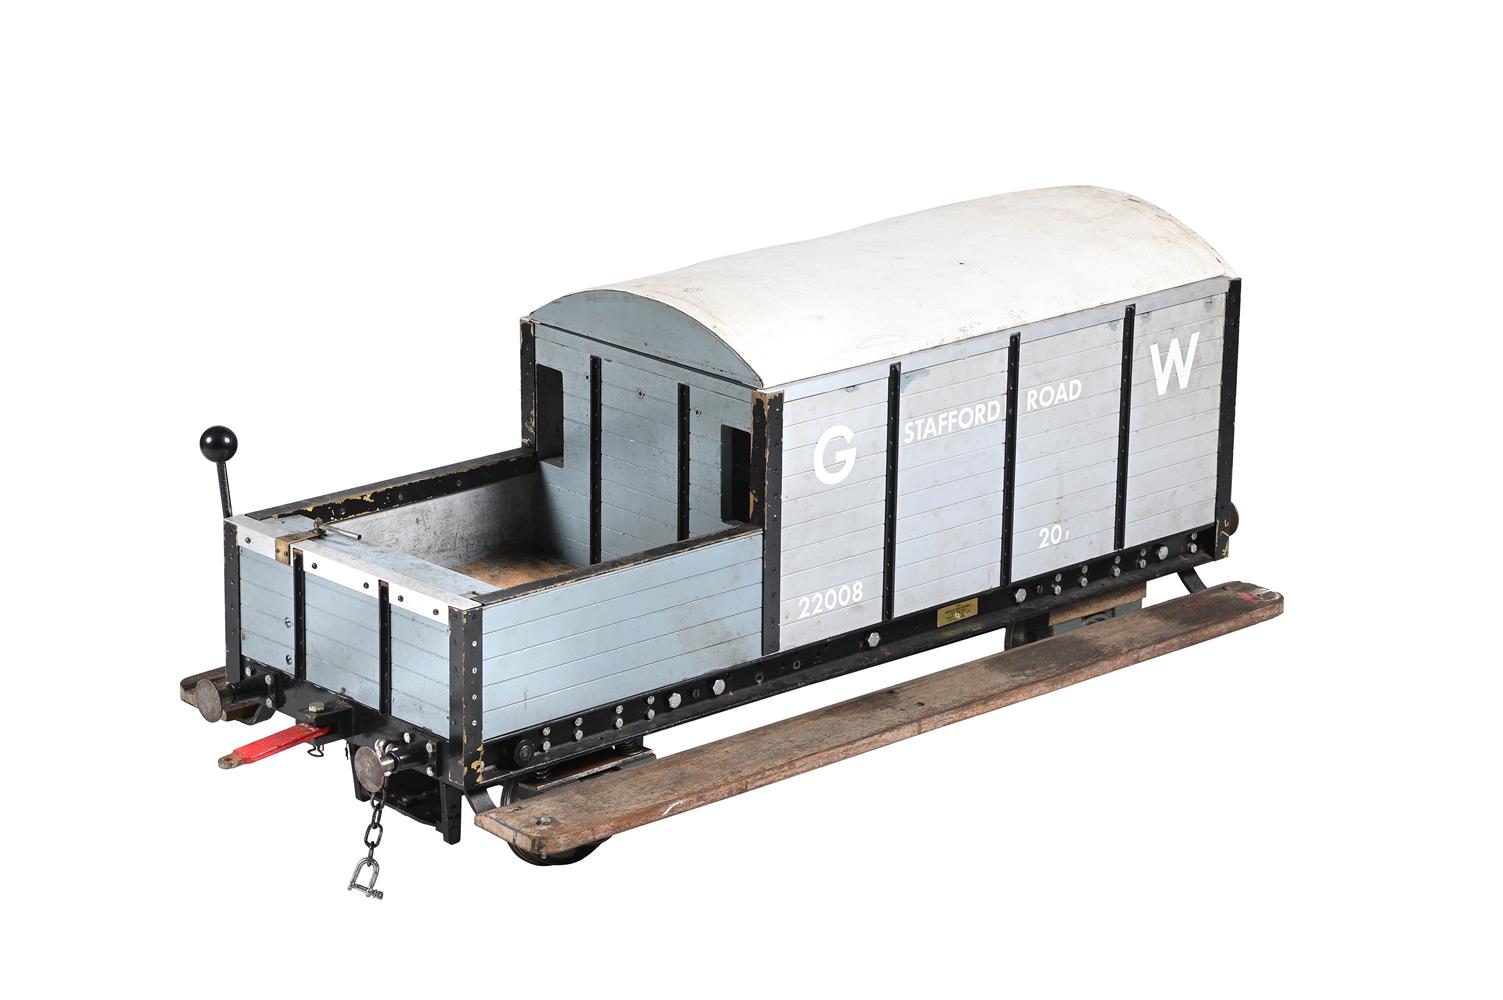 A WELL-ENGINEERED 7 1/4 INCH GAUGE GREAT WESTERN 'STAFFORD ROAD' 20 TON PLANKED DRIVERS WAGON